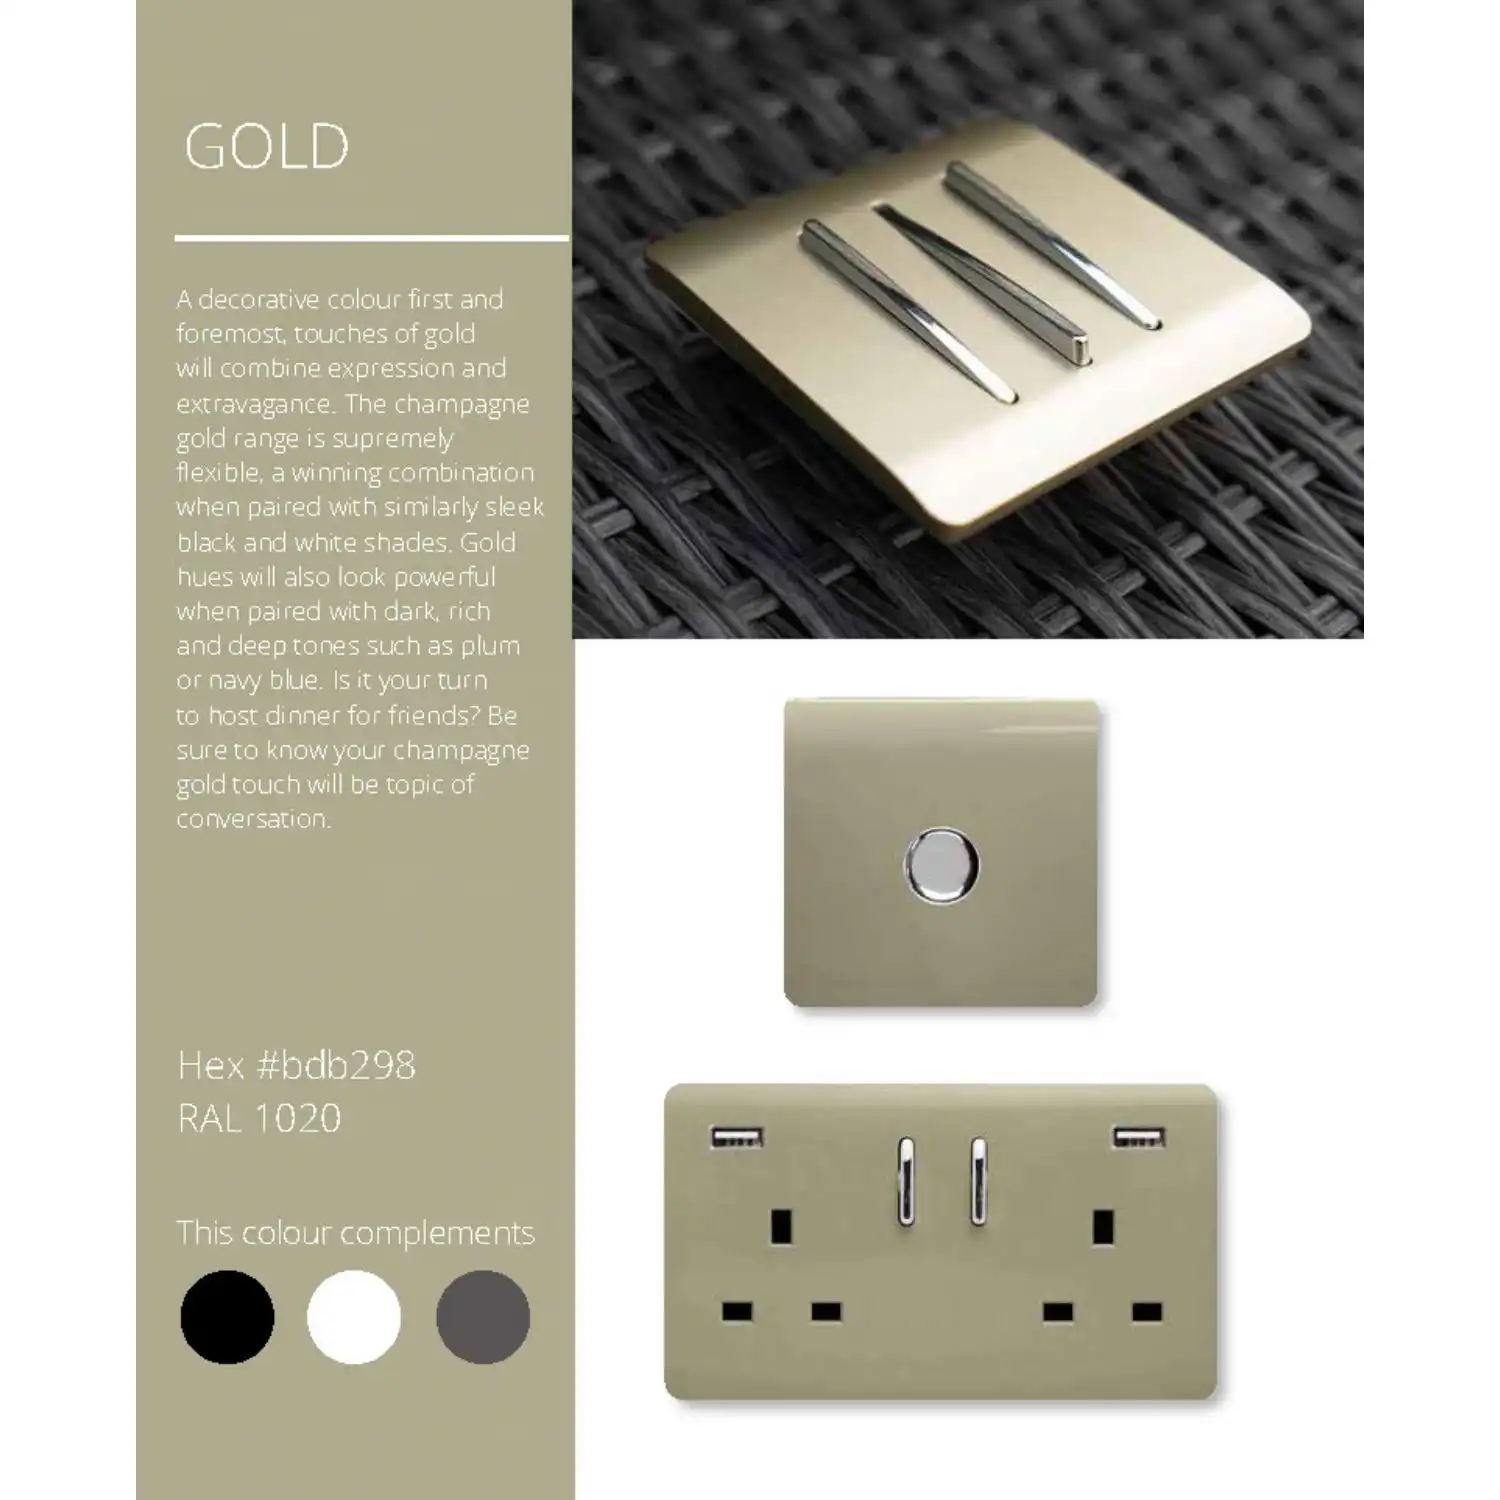 Trendi, Artistic Modern Single PC Ethernet Cat 5 And 6 Data Outlet Champagne Gold Finish, BRITISH MADE, (35mm Back Box Required), 5yrs Warranty